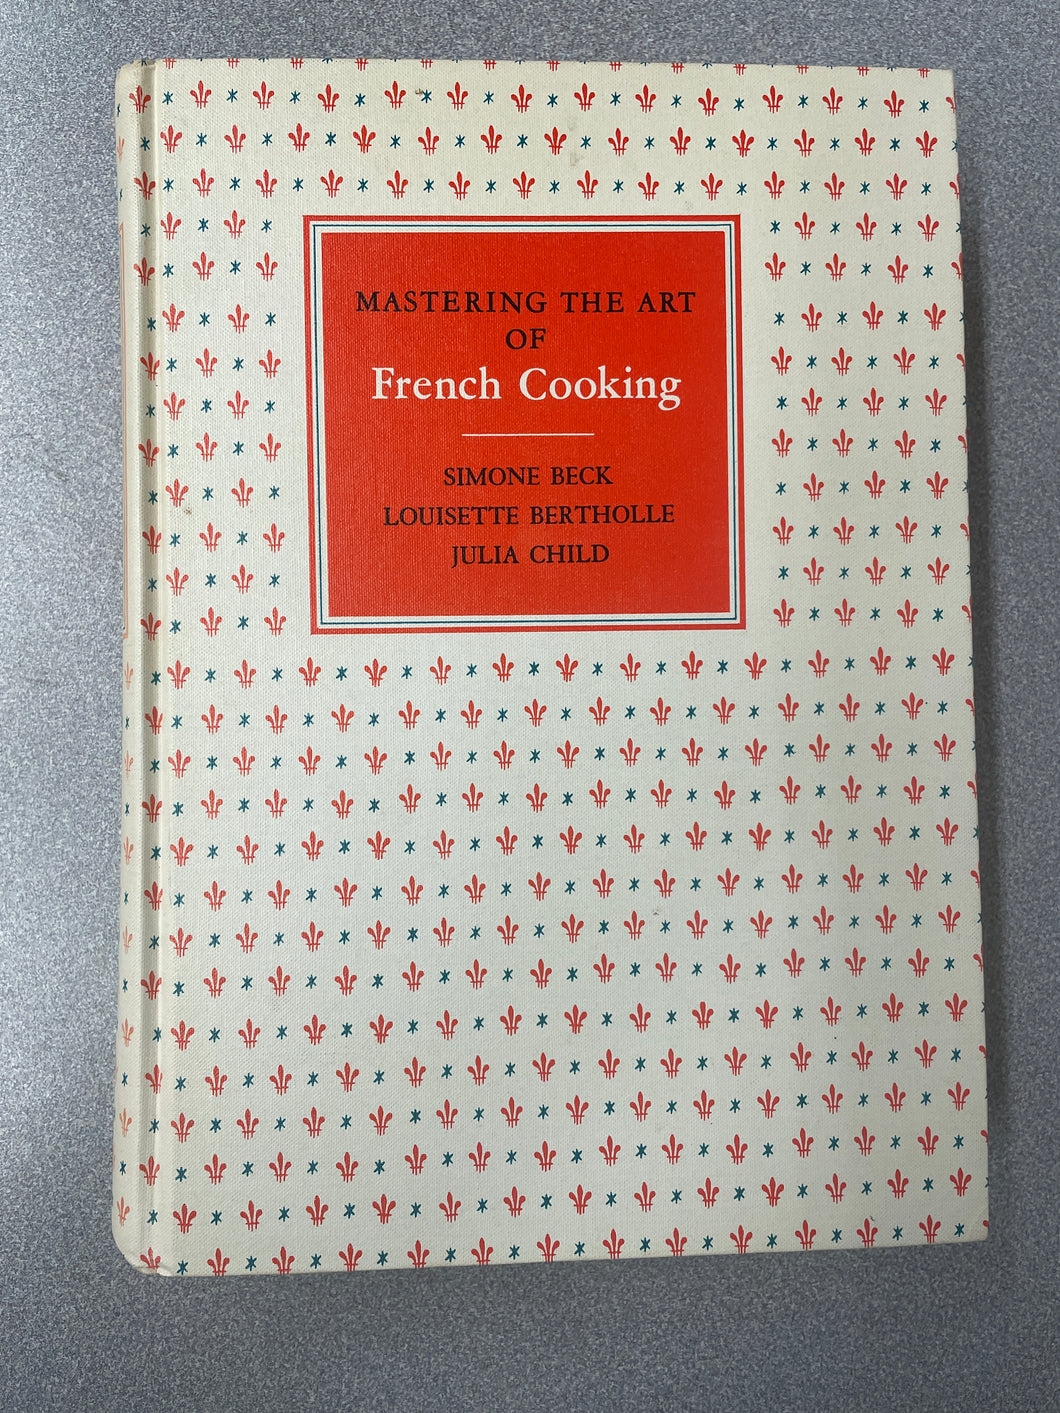 Mastering the Art of French Cooking, Beck, Simone, et al [1965] CO 4/24